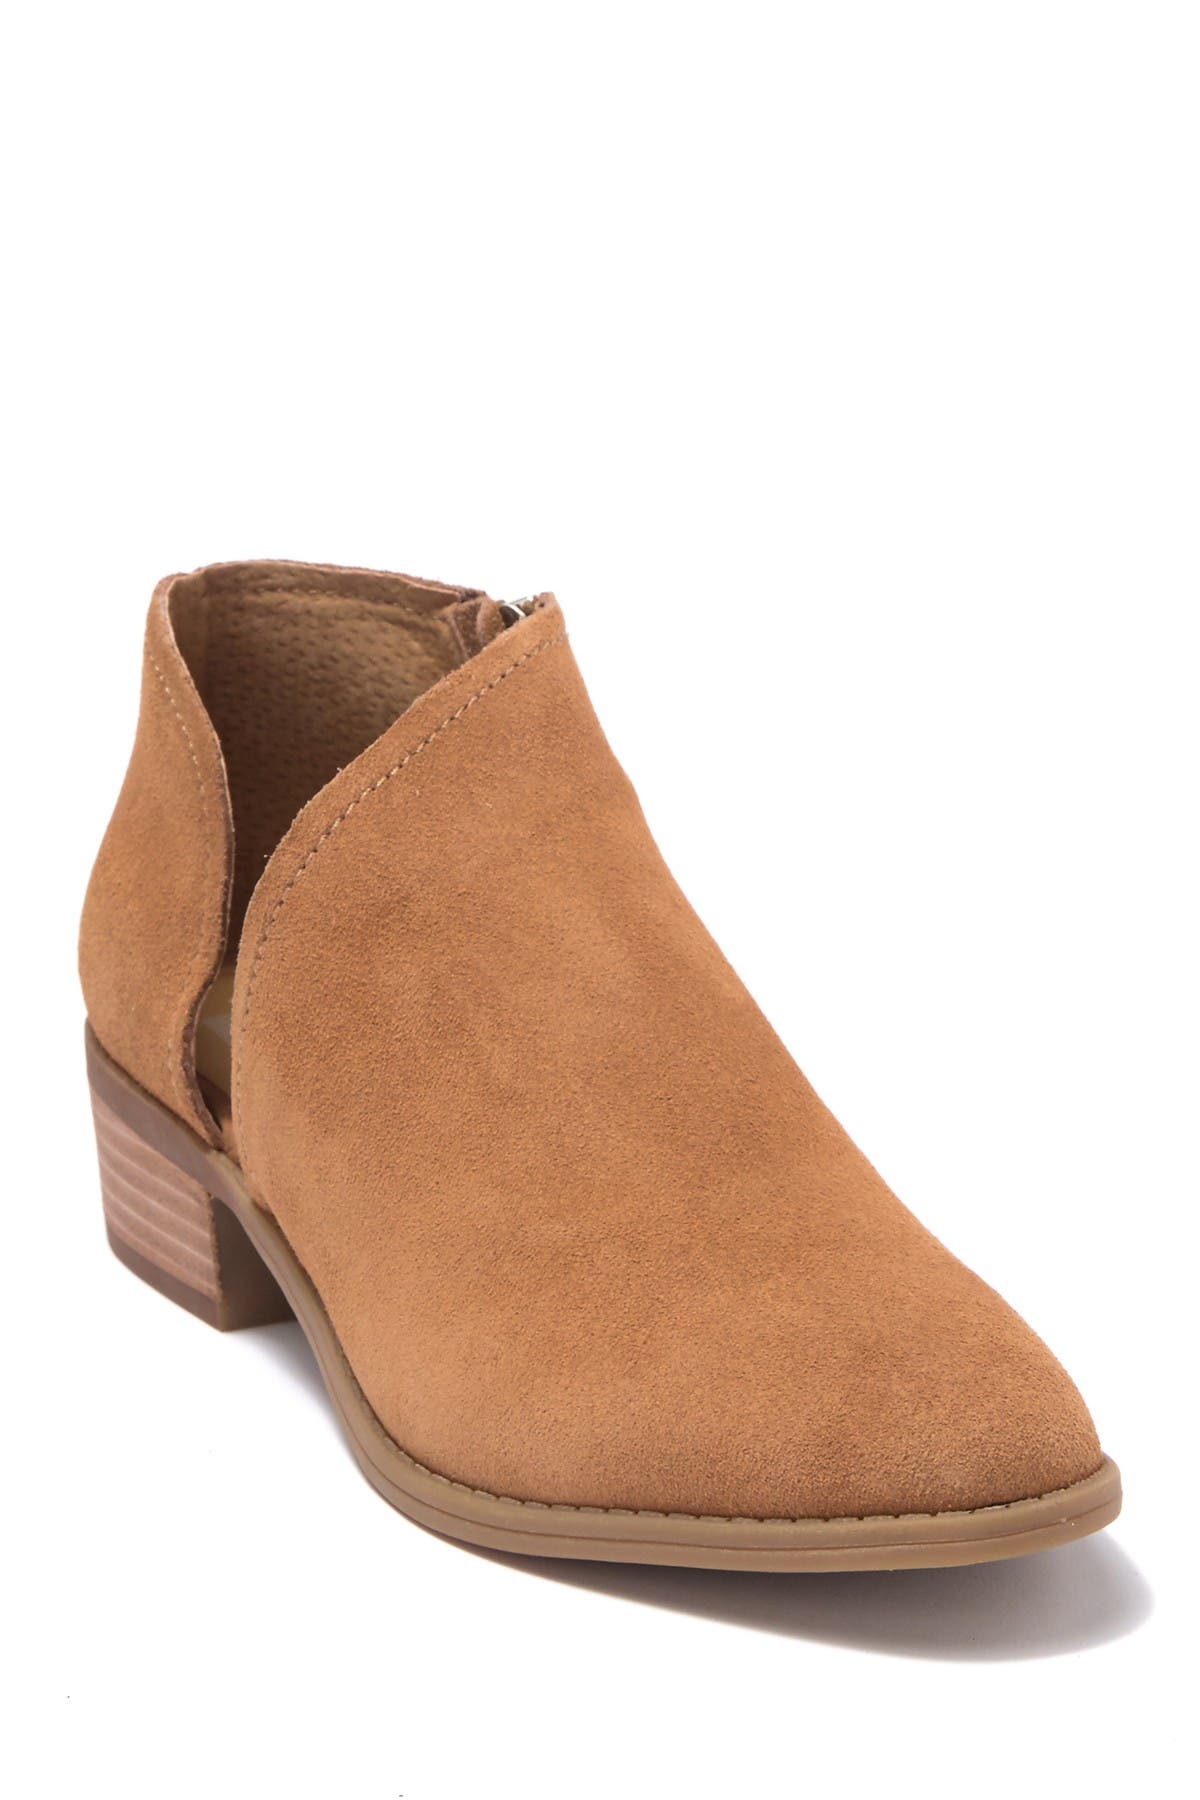 Dolce Vita | Tabitha Suede Ankle Boot 